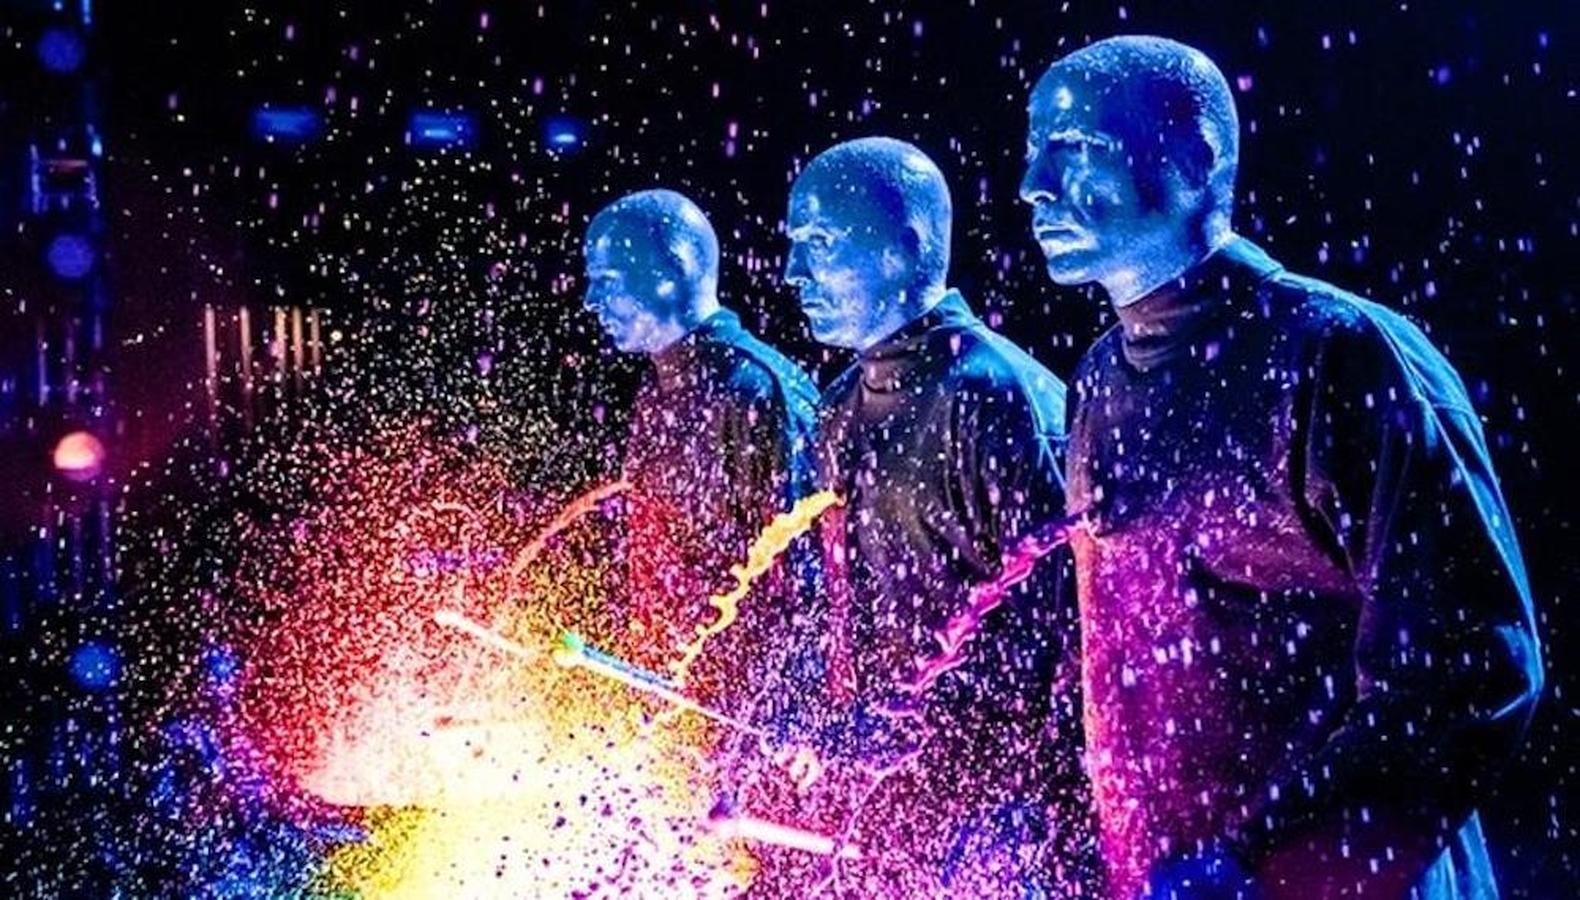 Blue Man Group Takes Us Behind the Scenes